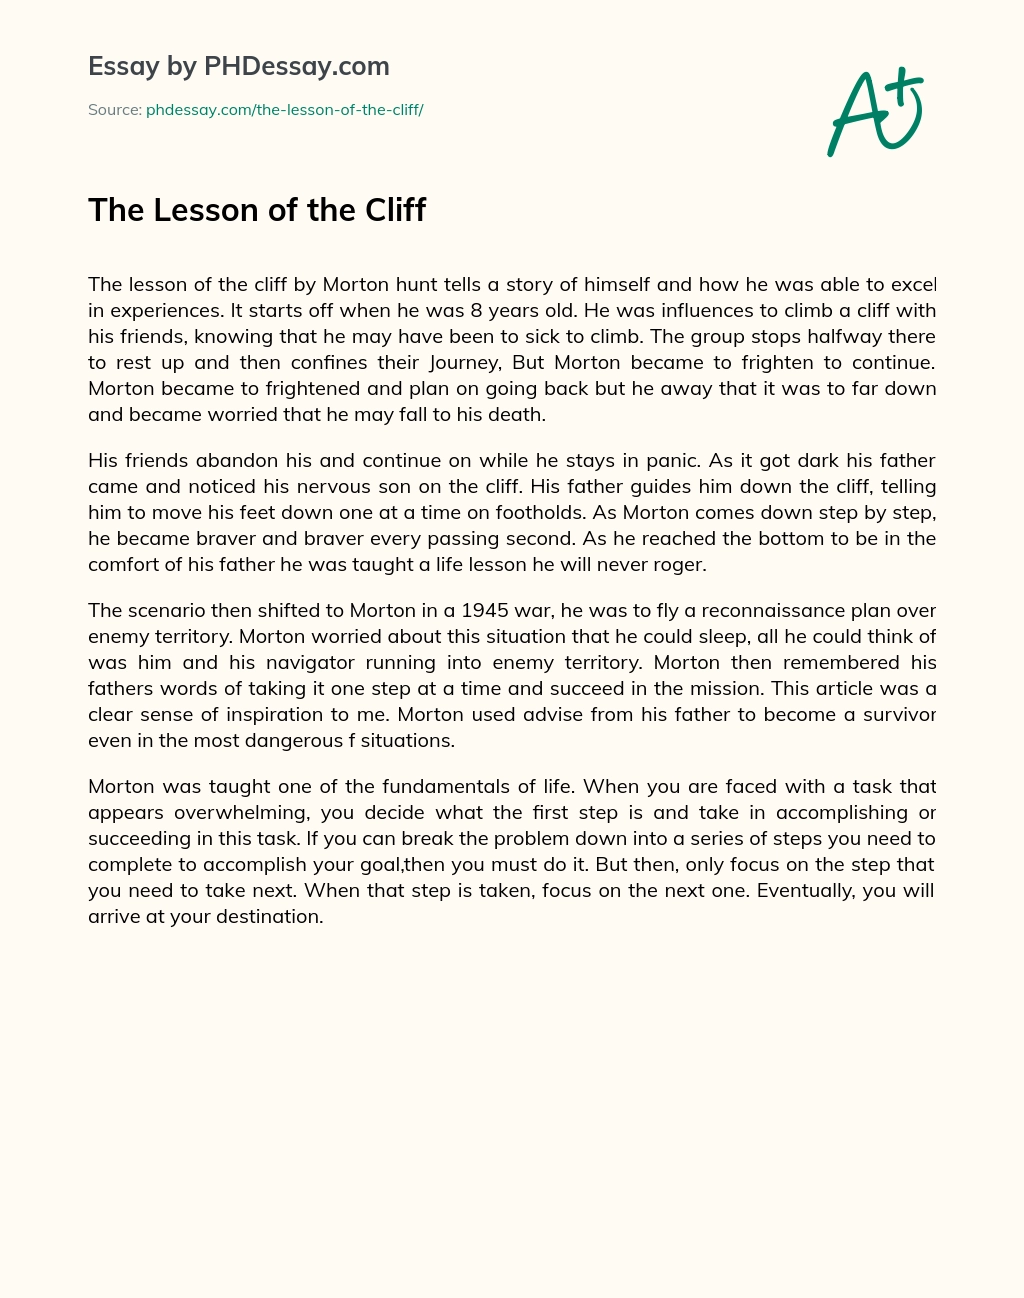 The Lesson of the Cliff essay